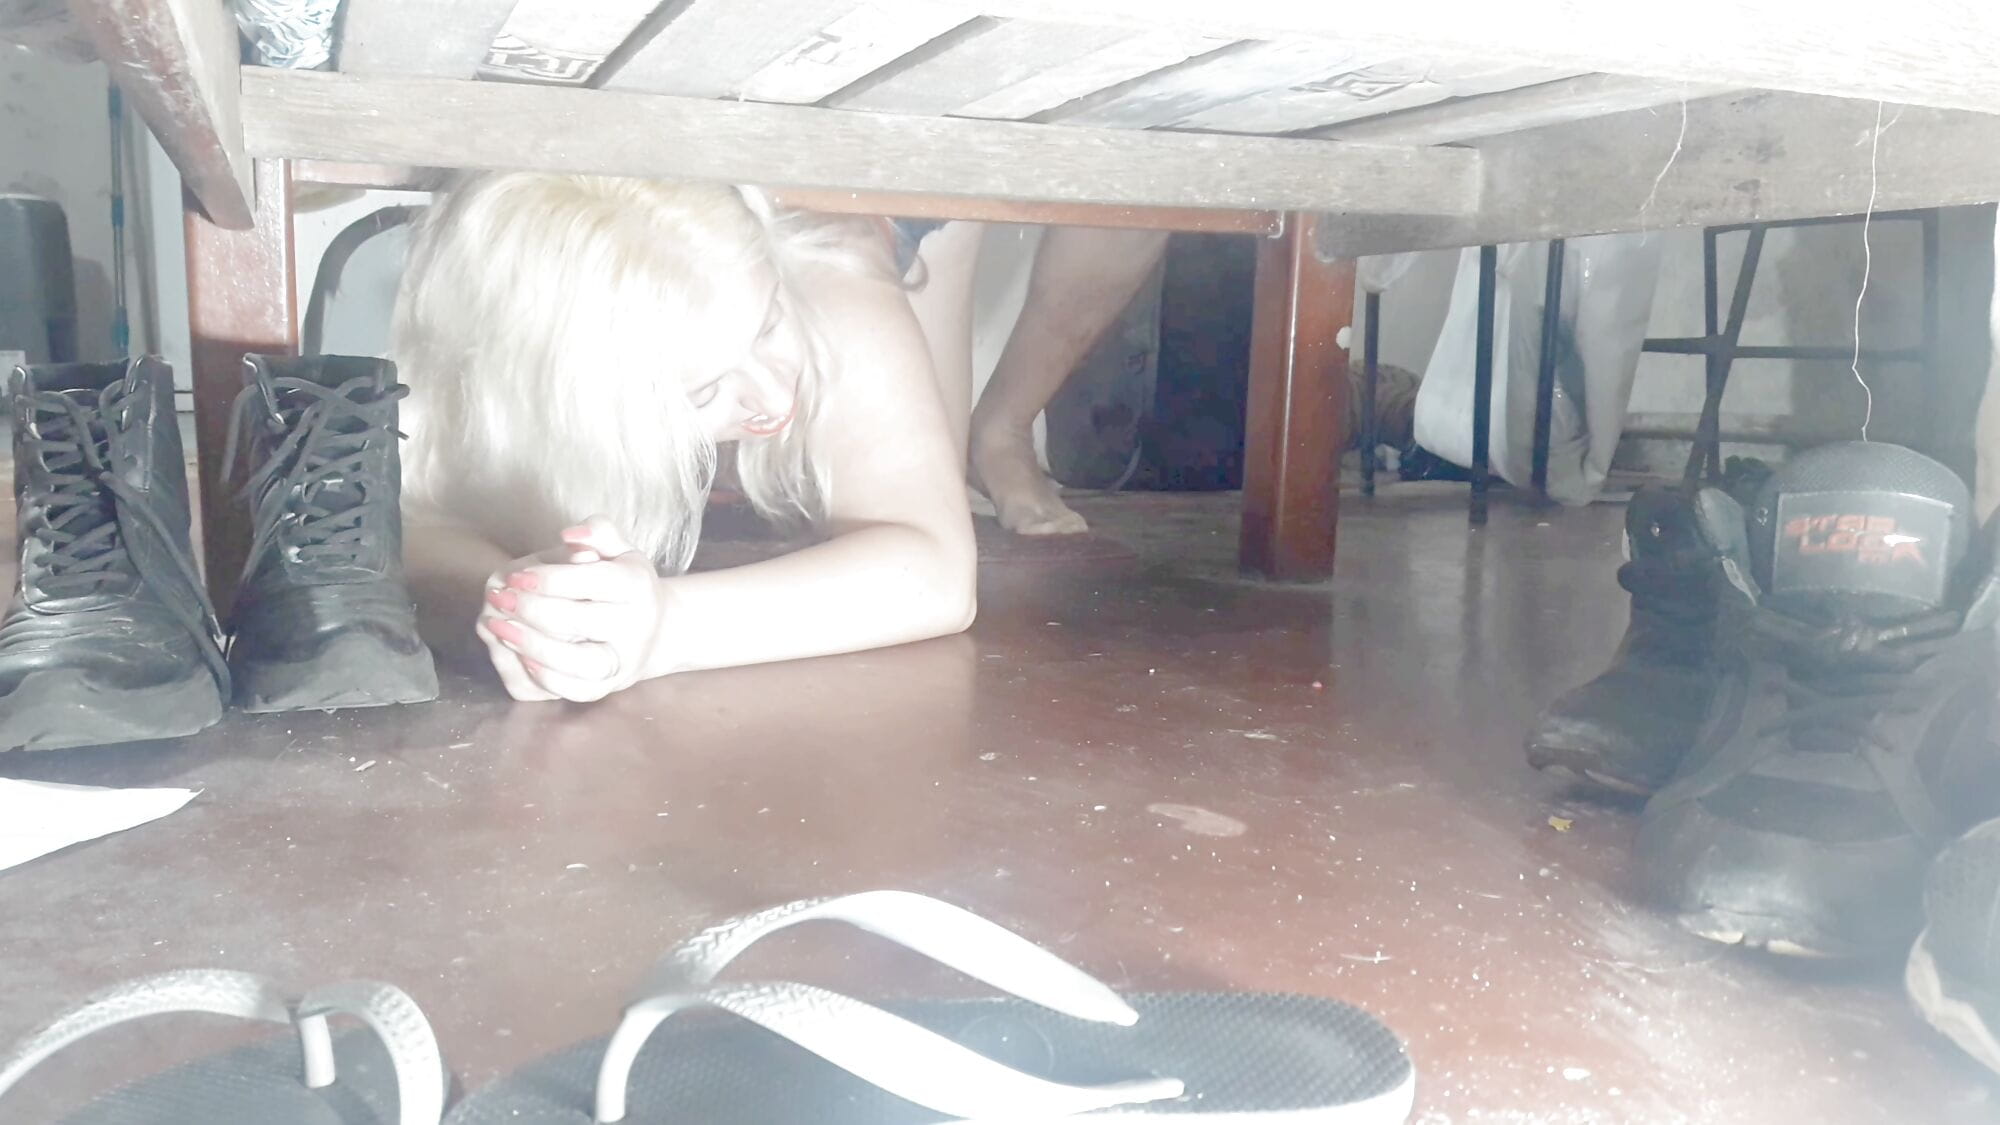 Hottie gets stuck under bed and man "gets along"